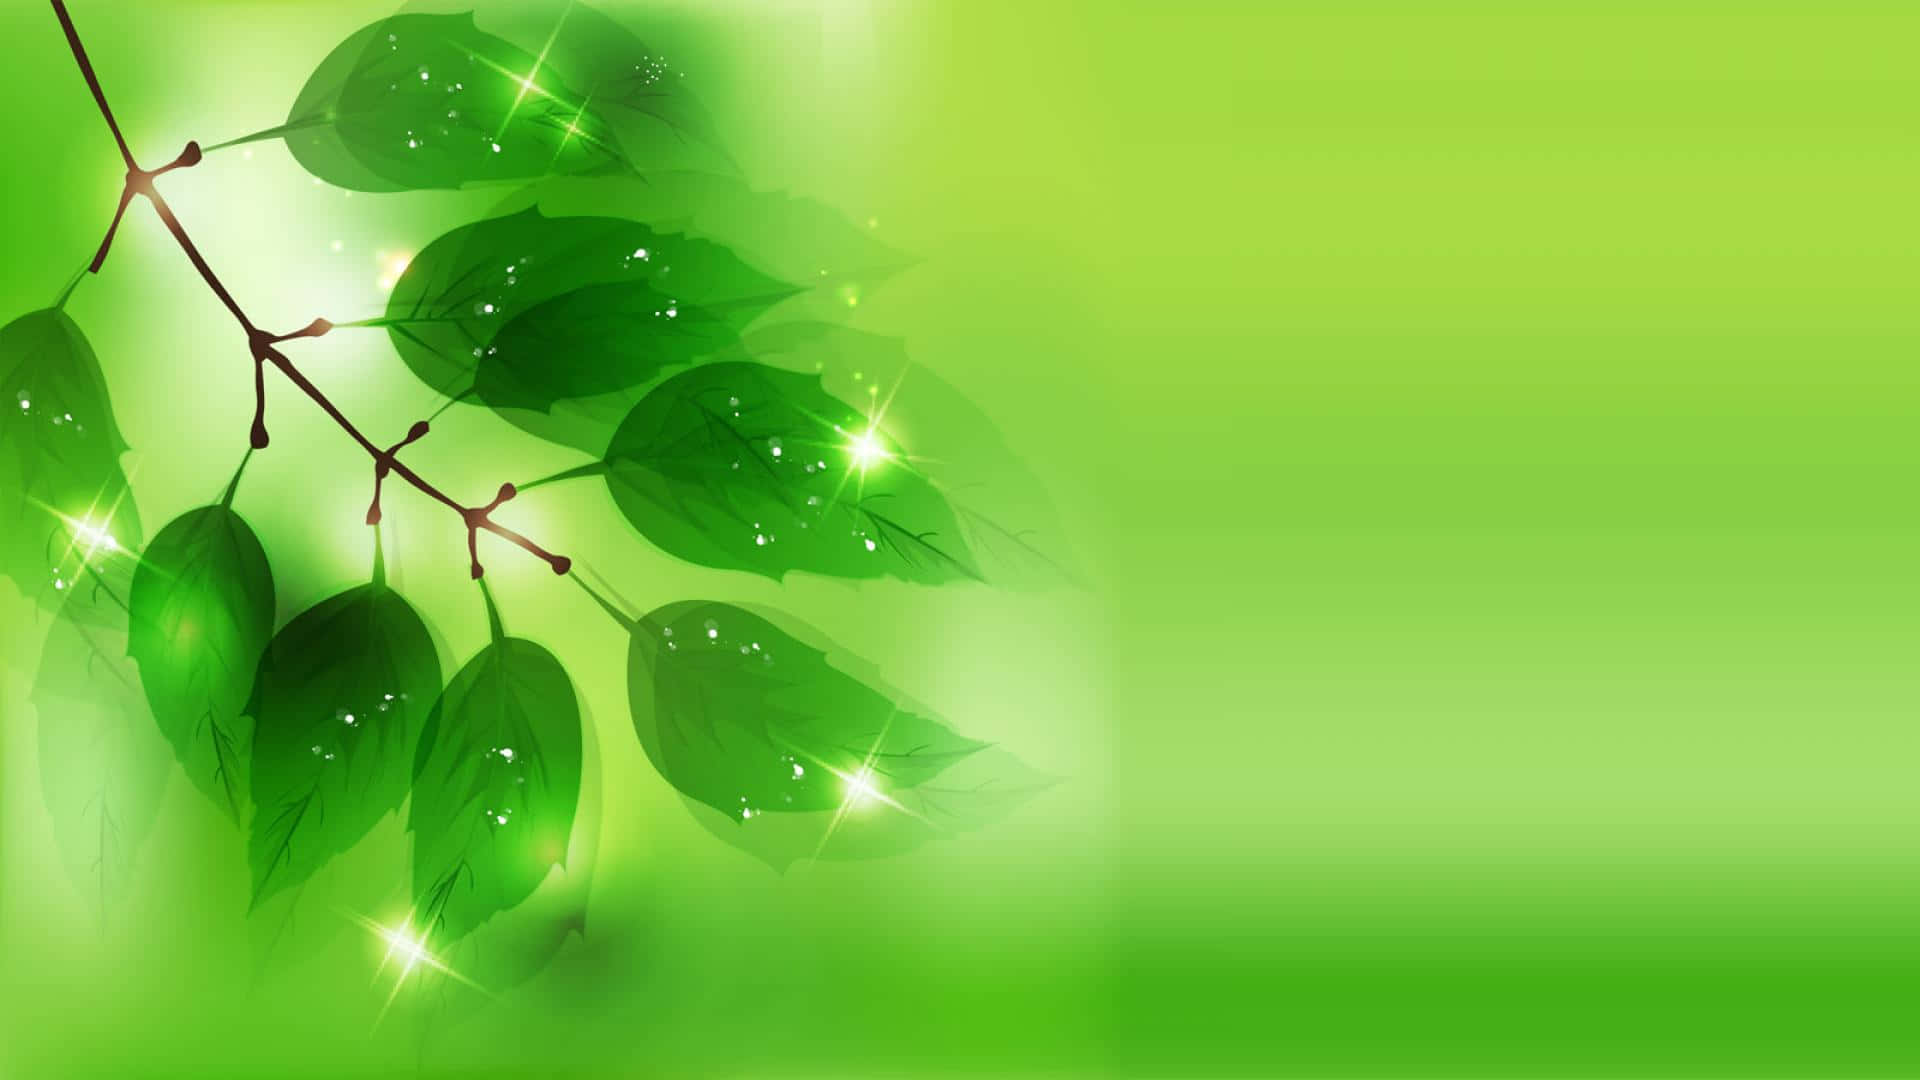 Abstract Green Background Wallpaper Vector for Free Download | FreeImages